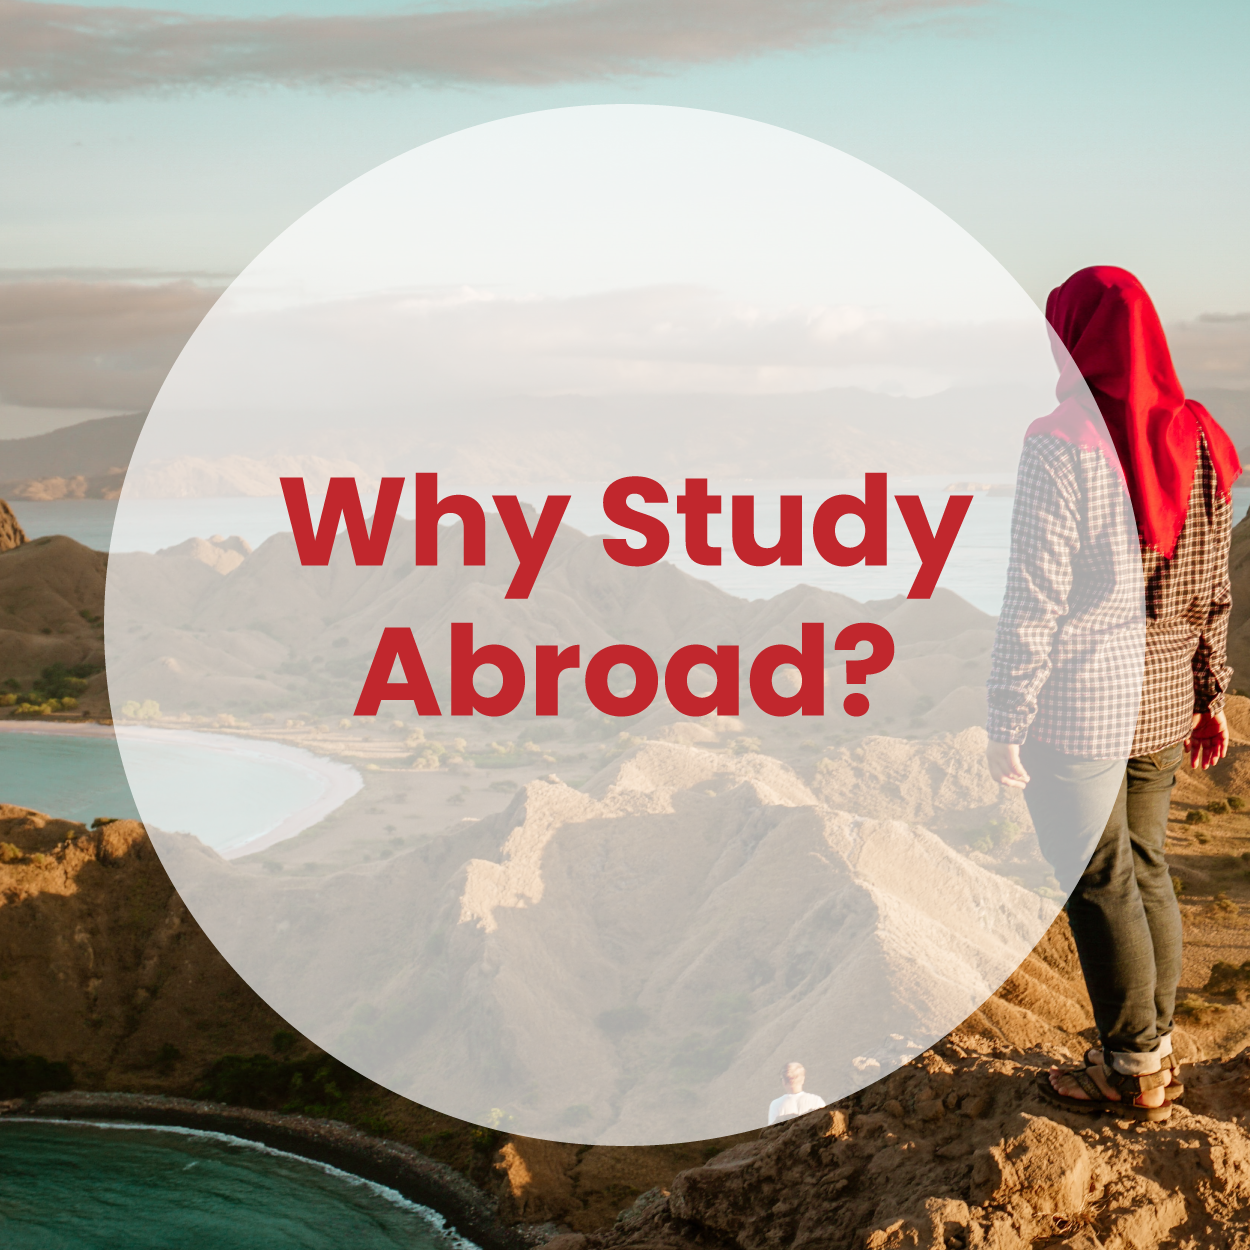 Why Study Abroad?